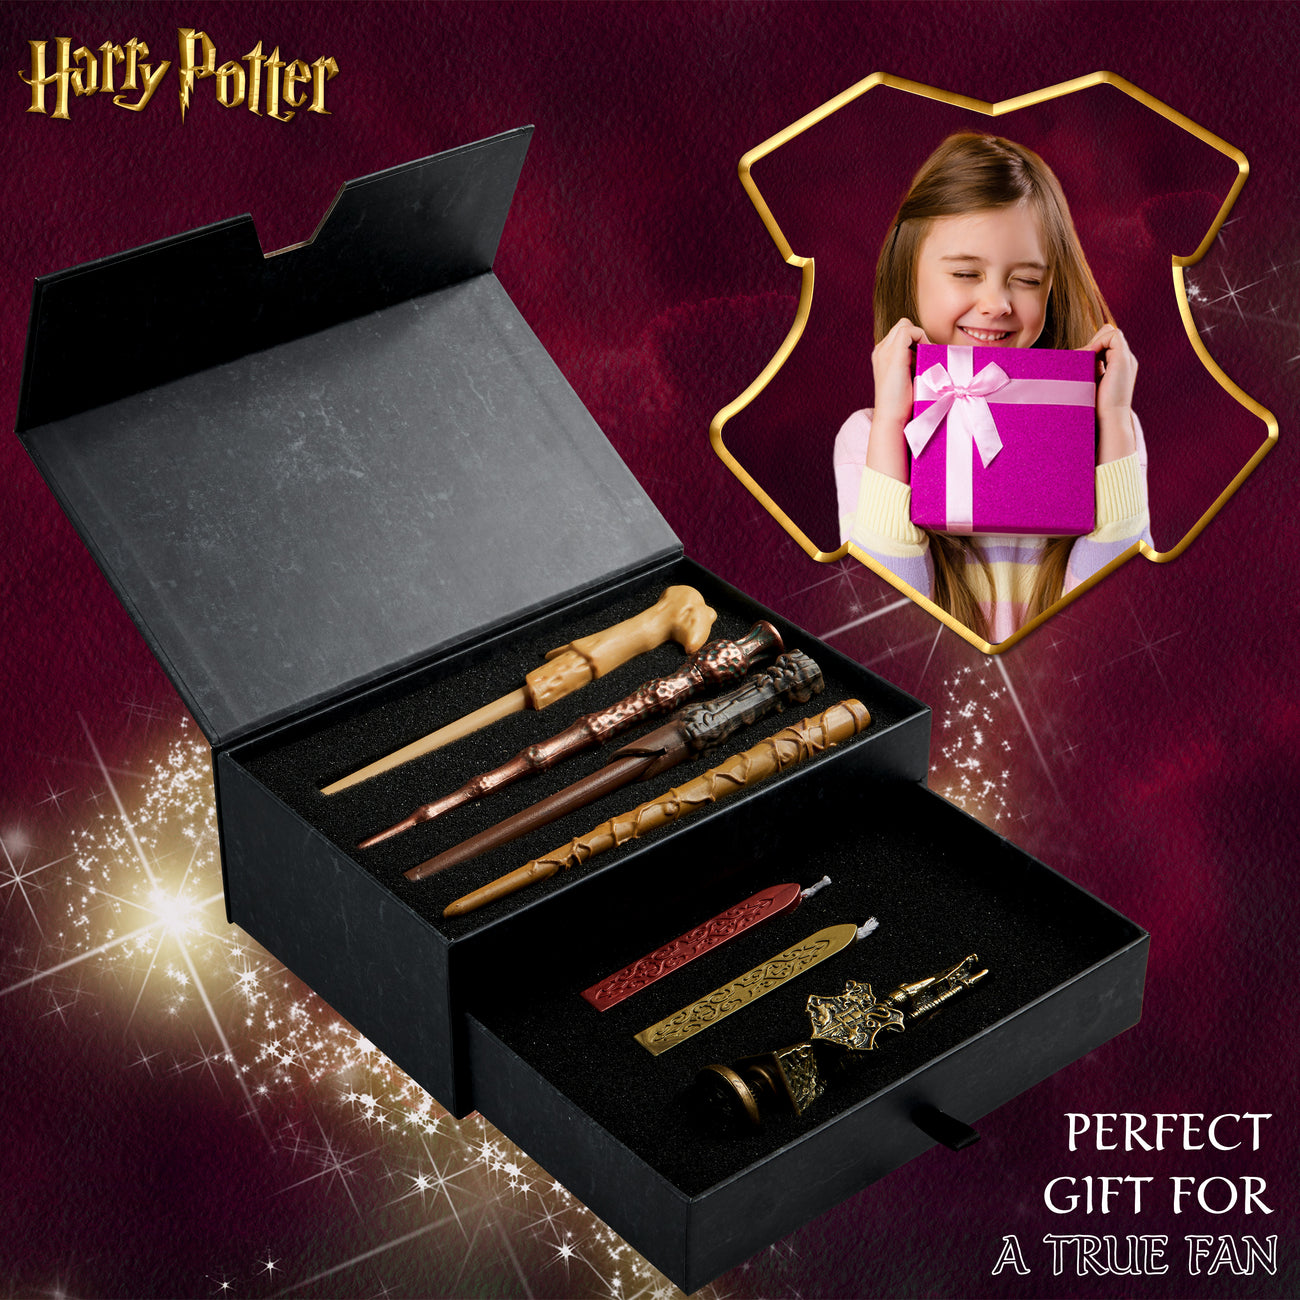 HARRY POTTER Stationery Set, Writing Paper, Notebook, Wand Pen, Stickers,  Envelopes, Gift Idea for Girl Boy + Souvenir Box